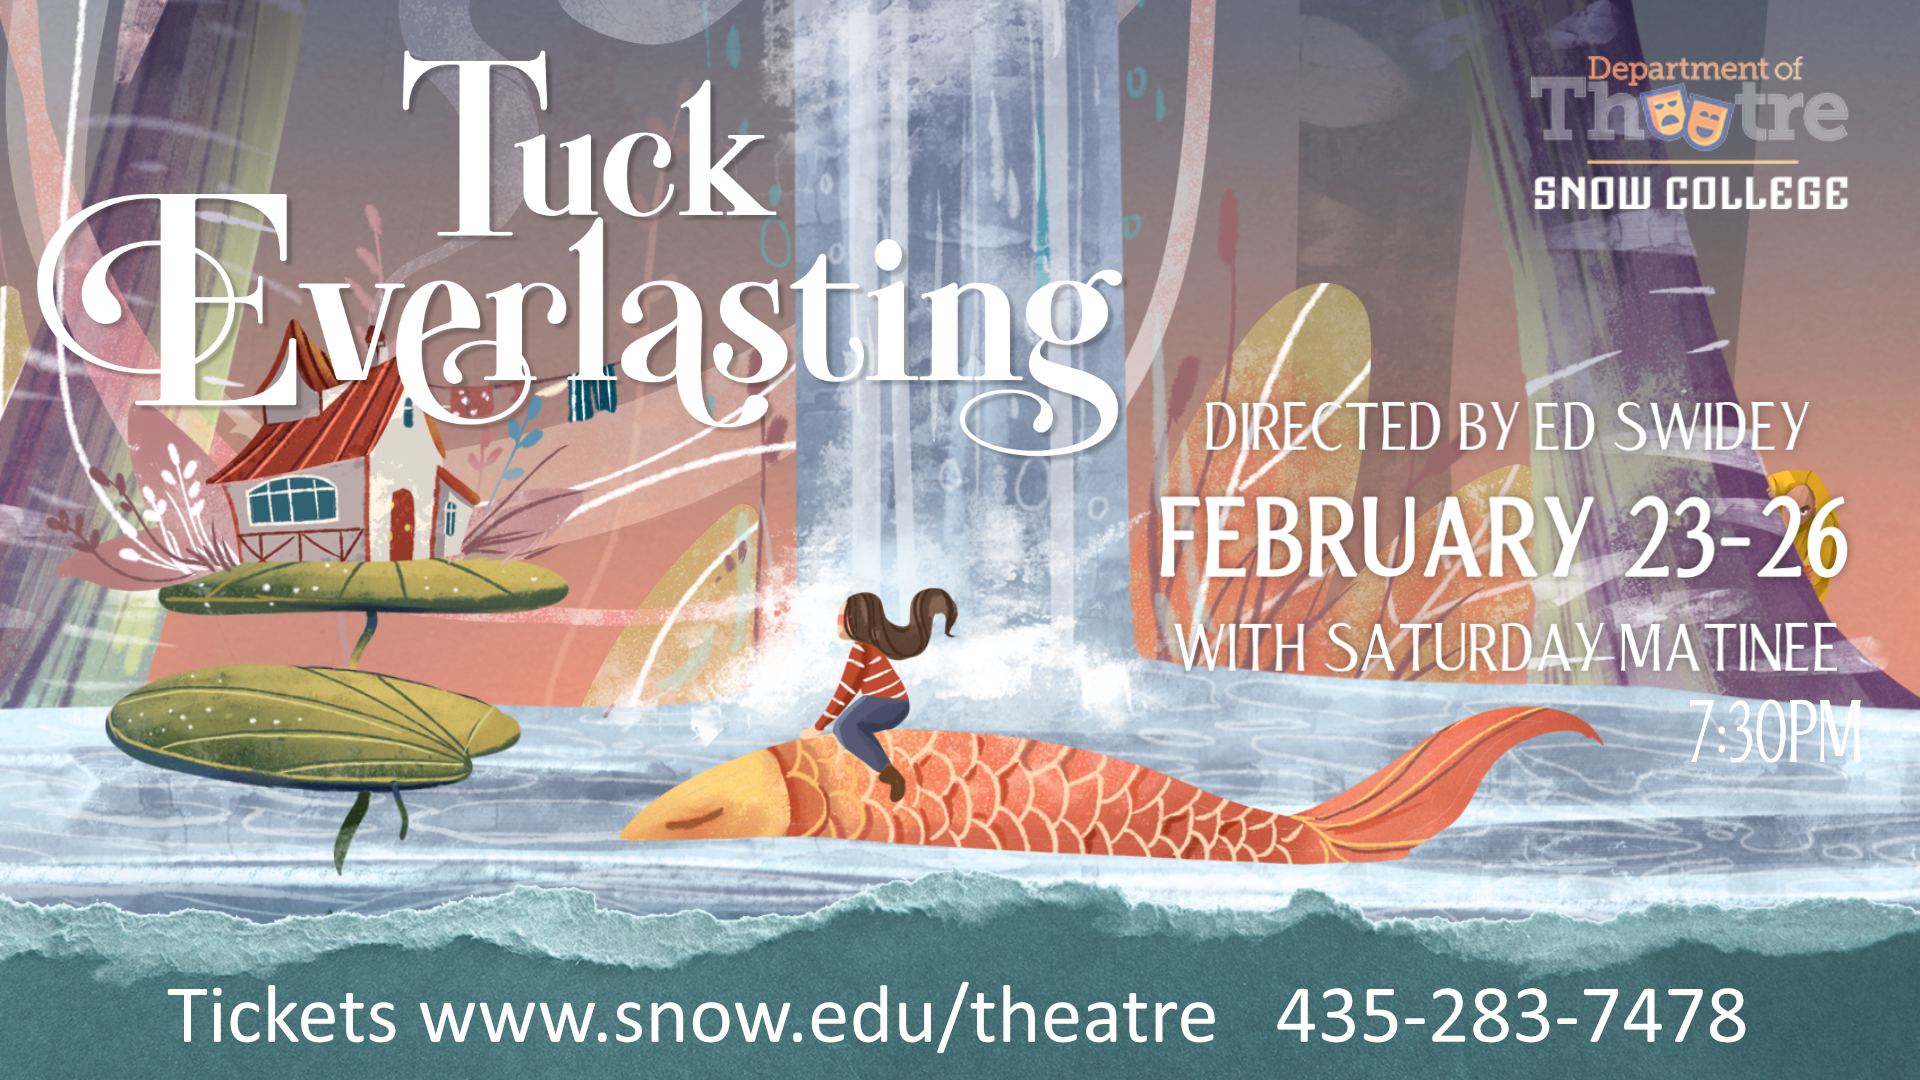 Tuck Everlasting. Directed by Ed Swidey, February 23- 26 with a saturday Matinee, 7:30pm Tickets at www.snow.edu/theatre 435-283-7478